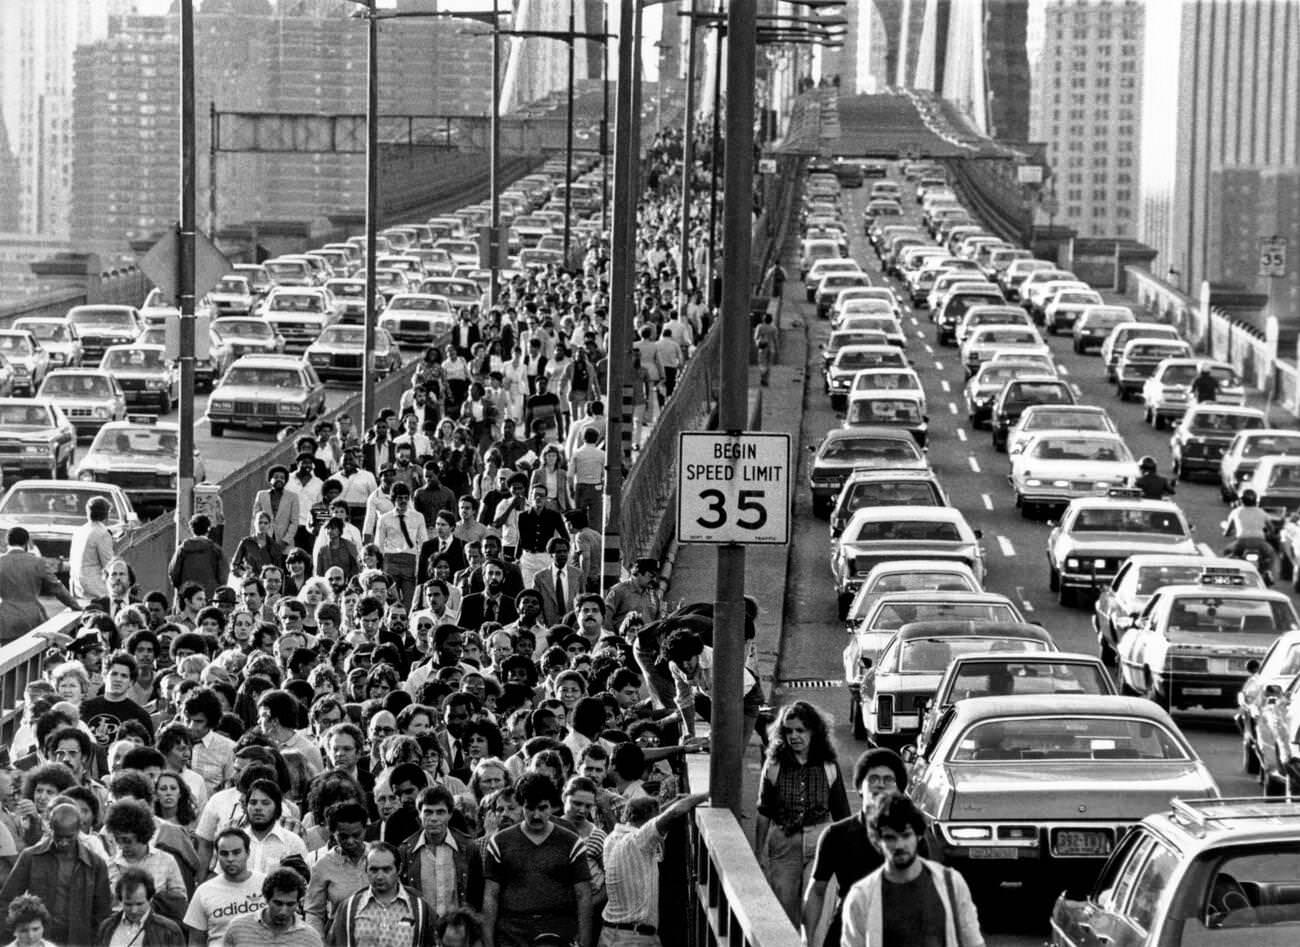 Brooklyn Bridge Jammed Due To Power Outage Affecting Subway, 1978.